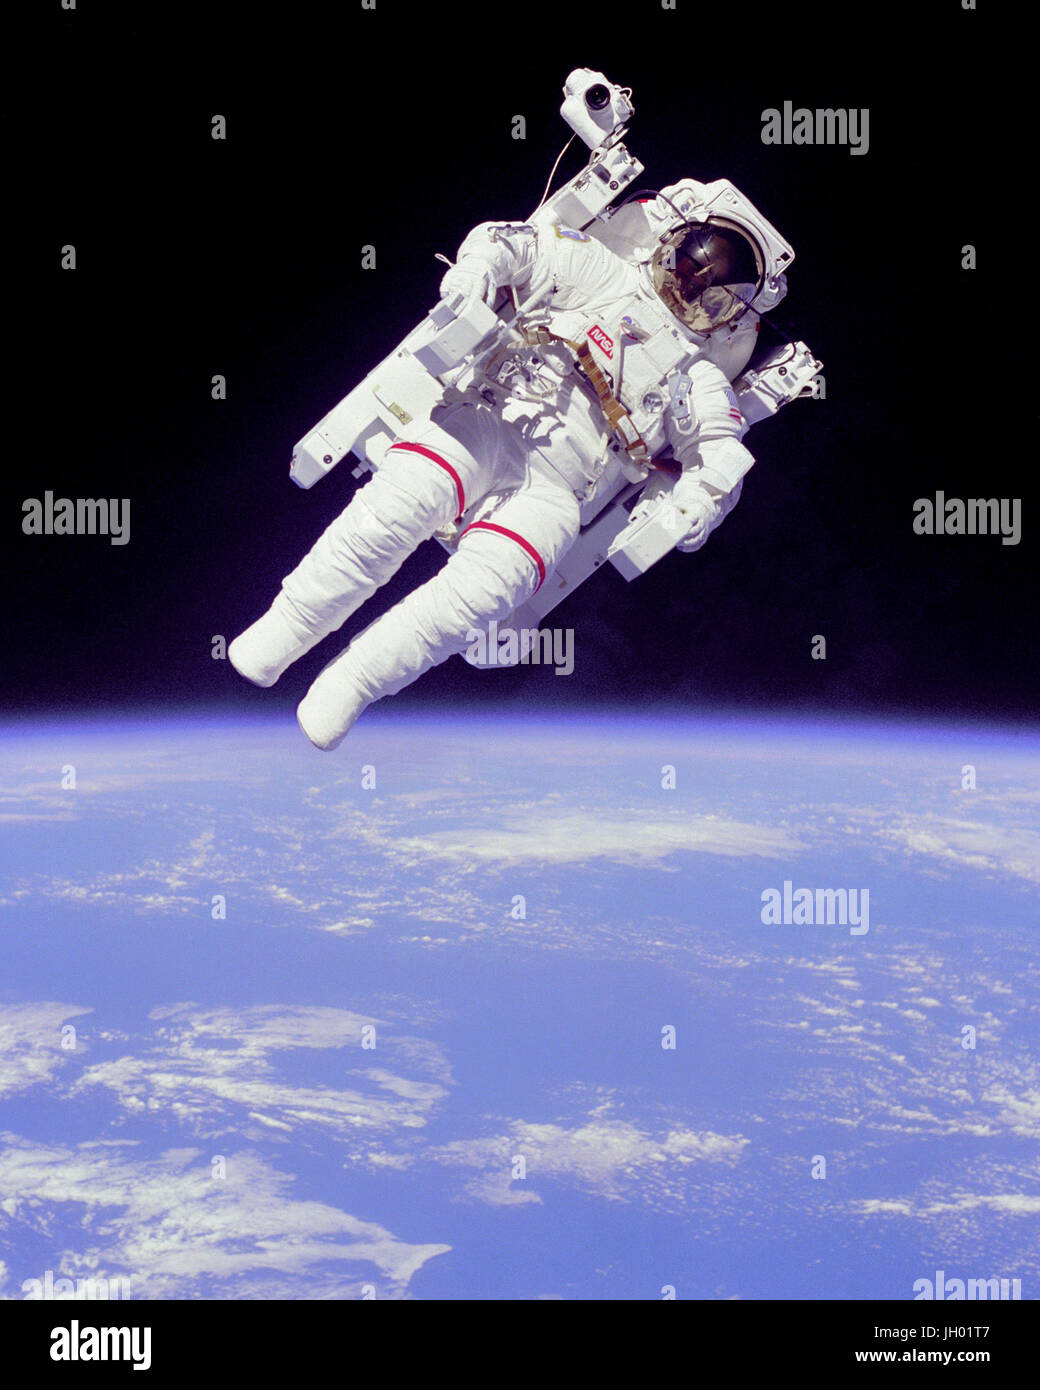 'Backpacking'.Full Description.Mission Specialist Bruce McCandless II ventured further away from the confines and safety of his ship than any previous astronaut ever has. This space first was made possible by the Manned Manuevering Unit or MMU, a nitrogen jet propelled backpack. After a series of test maneuvers inside and above Challenger's payload bay, McCandless went 'free-flying' to a distance of 320 feet away from the Orbiter. The MMU is controled by joy sticks positioned at the end of the arm rests. Moving the joy sticks left or right or by pulling them fires nitrogen jet thrusters propel Stock Photo